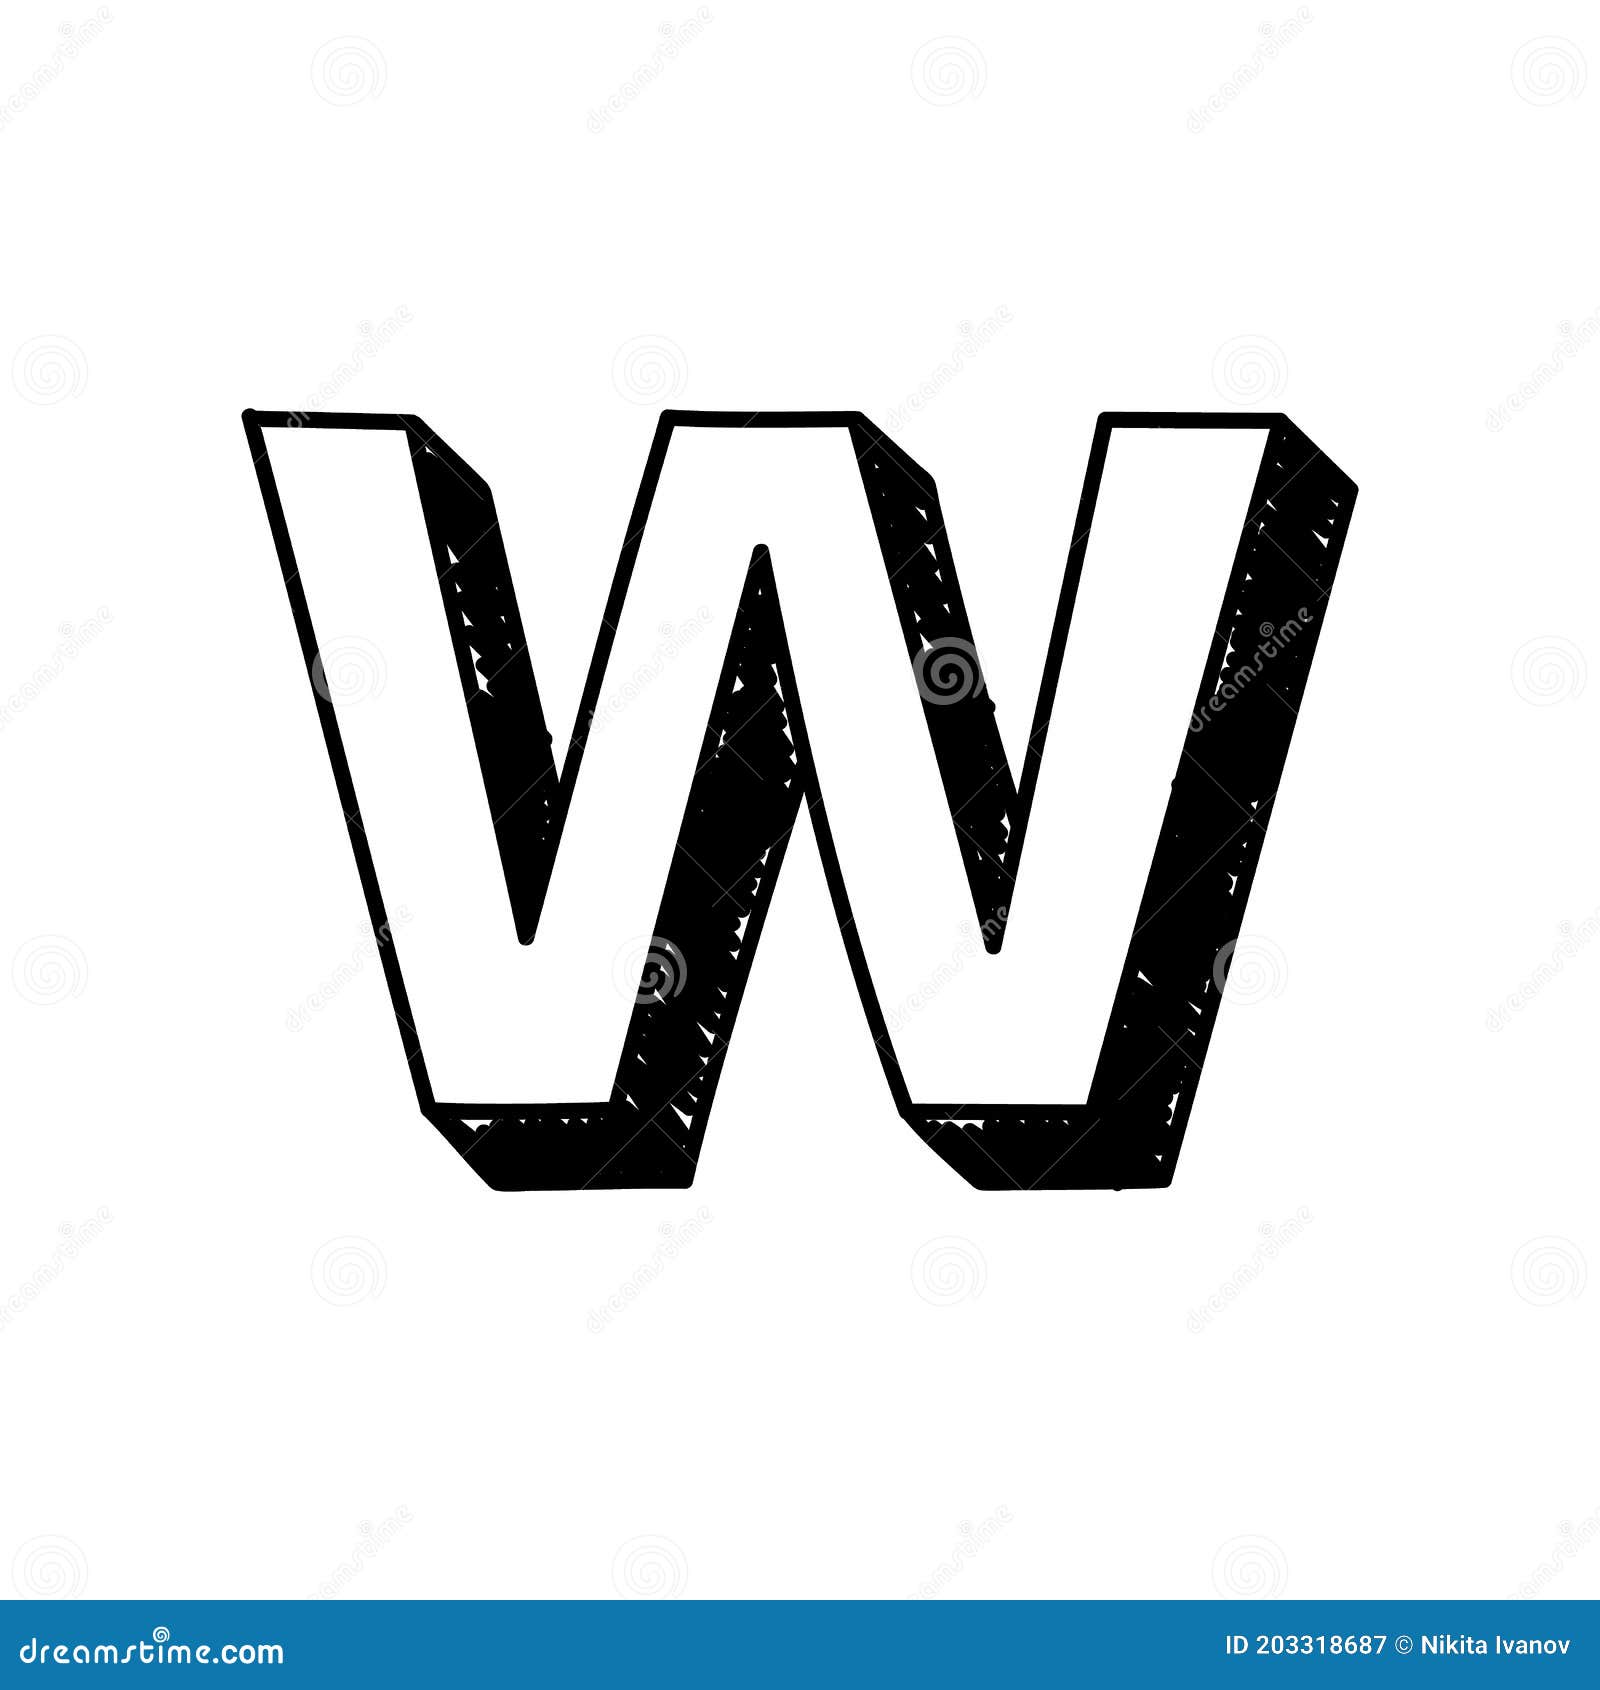 W Letter Hand-drawn Symbol. Vector Illustration of a Small English Letter W  Stock Illustration - Illustration of font, shadow: 203318687